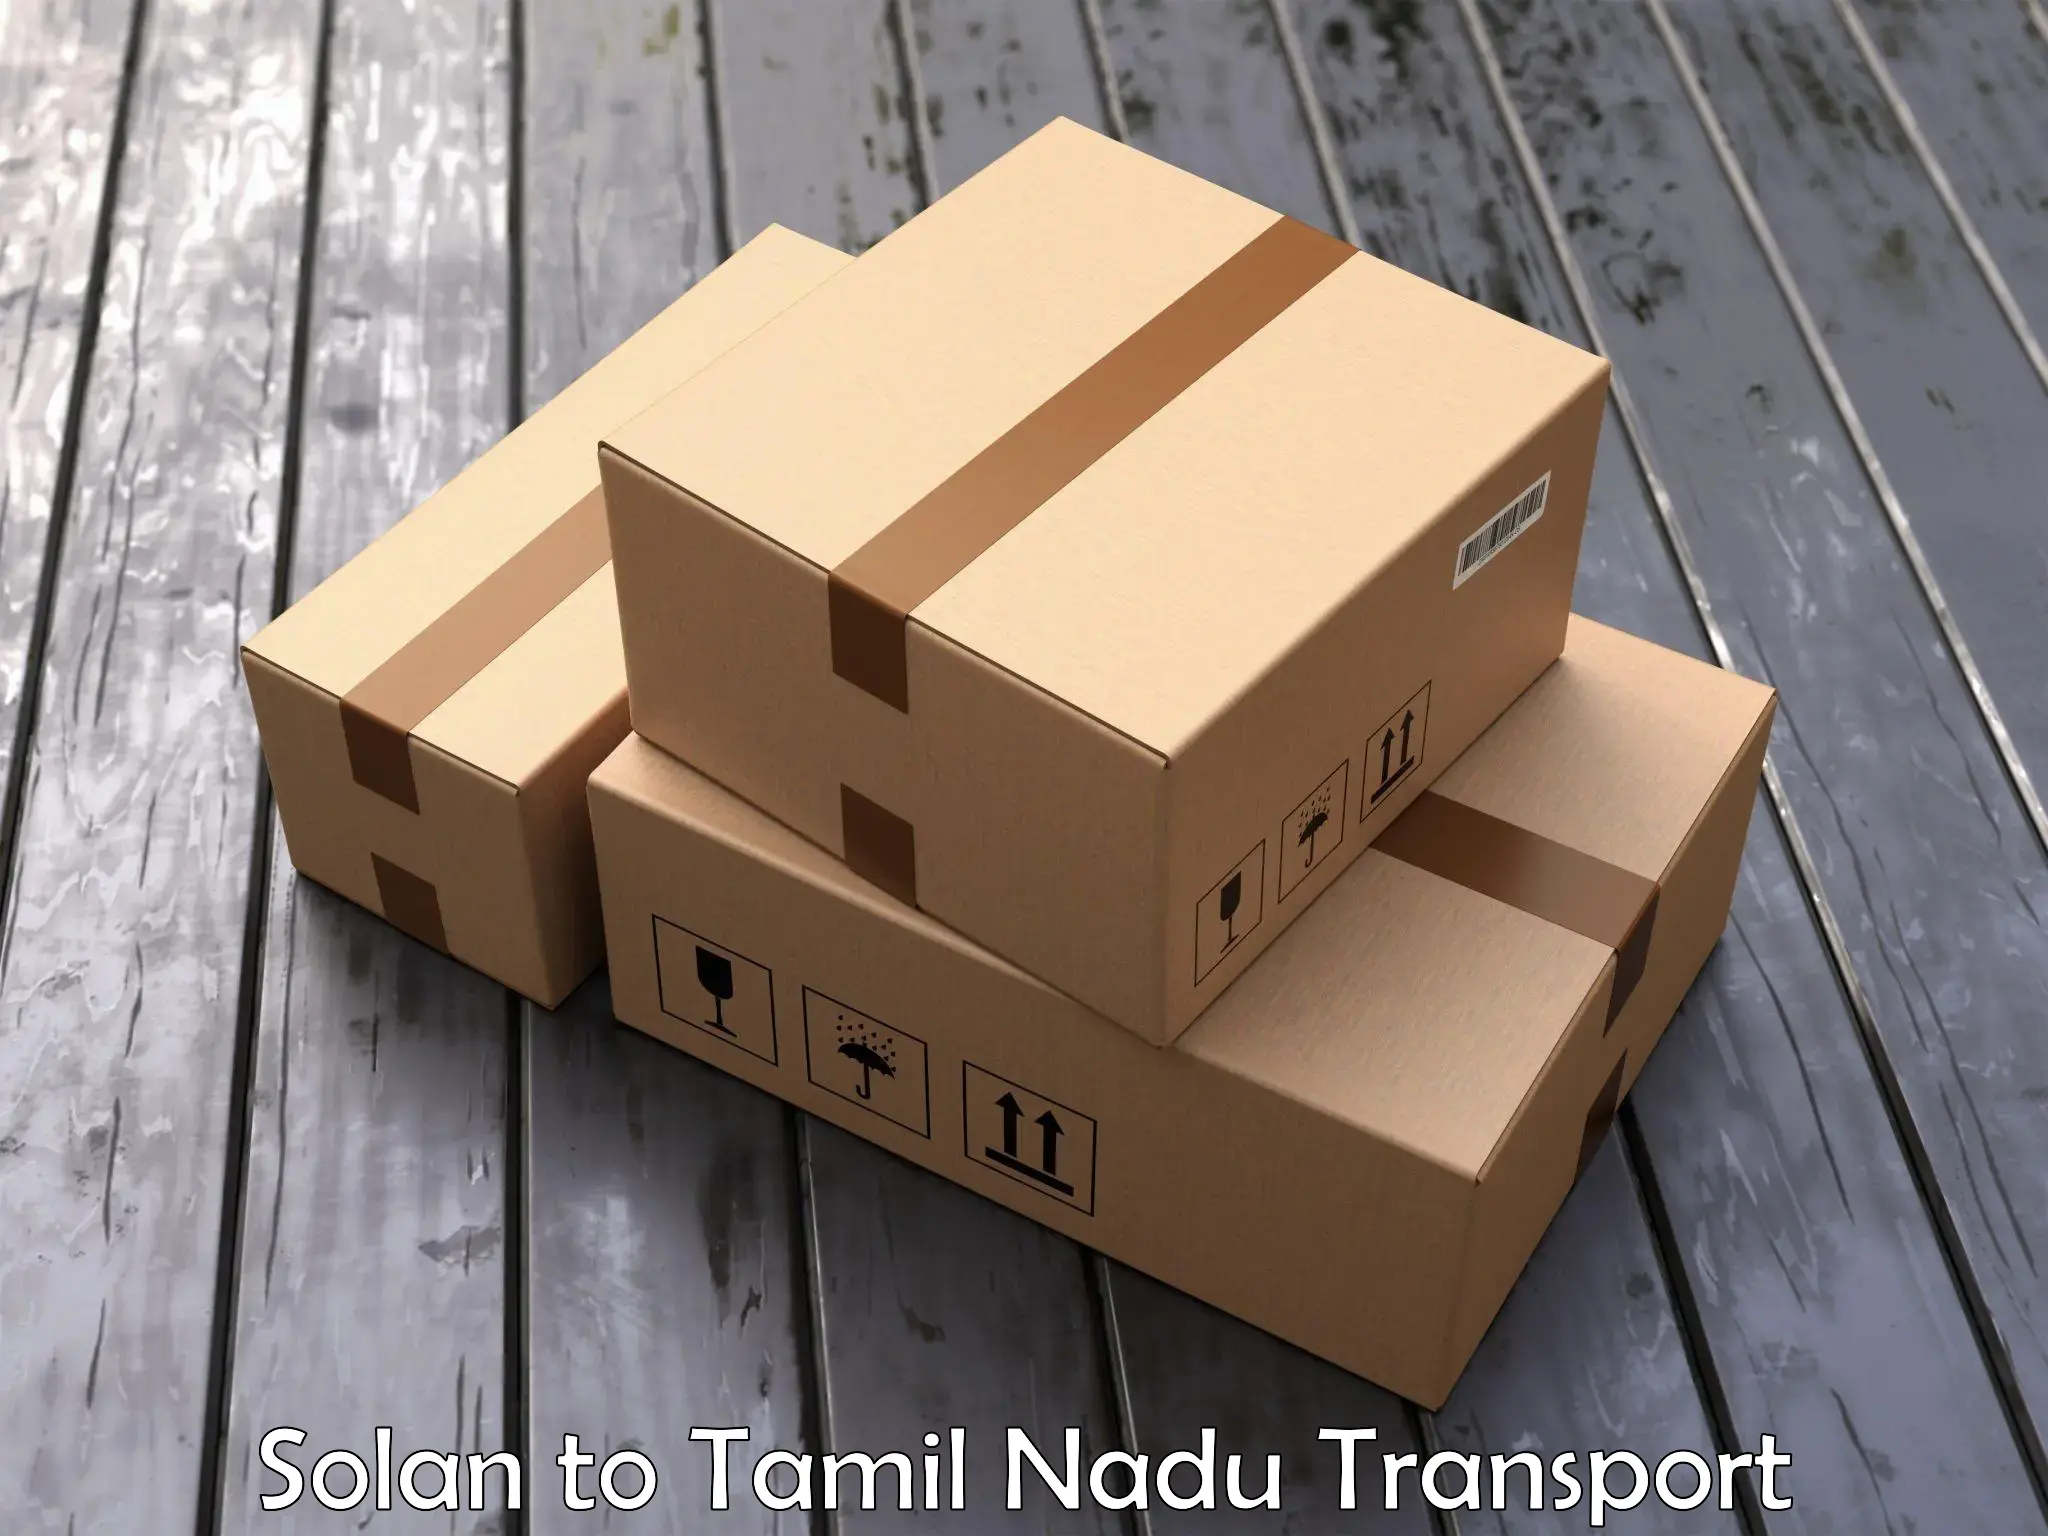 Container transport service Solan to Eraiyur